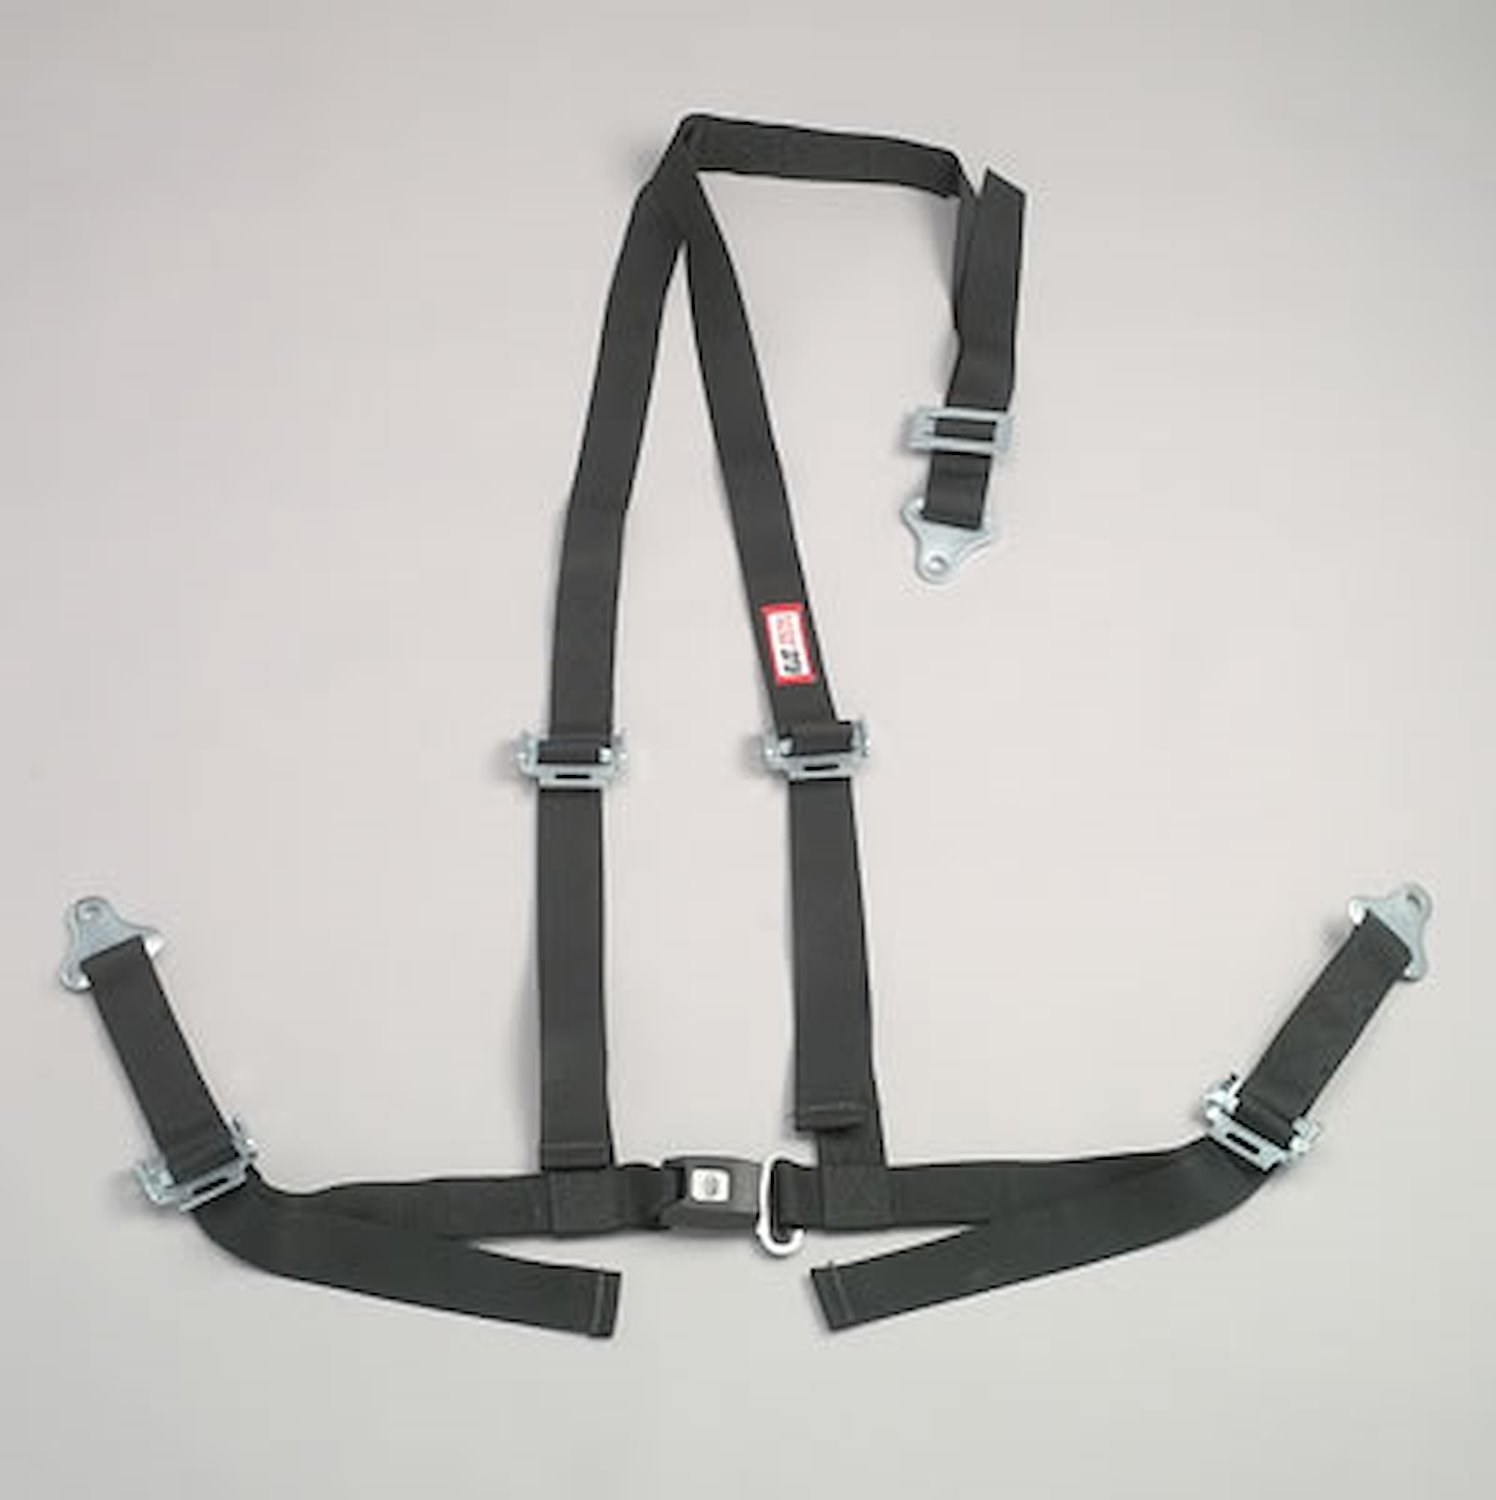 NON-SFI B&T HARNESS 2 PULL UP Lap Belt 2 S. H. V ROLL BAR Mount ALL SNAP ENDS w/STERNUM STRAP OD GREEN